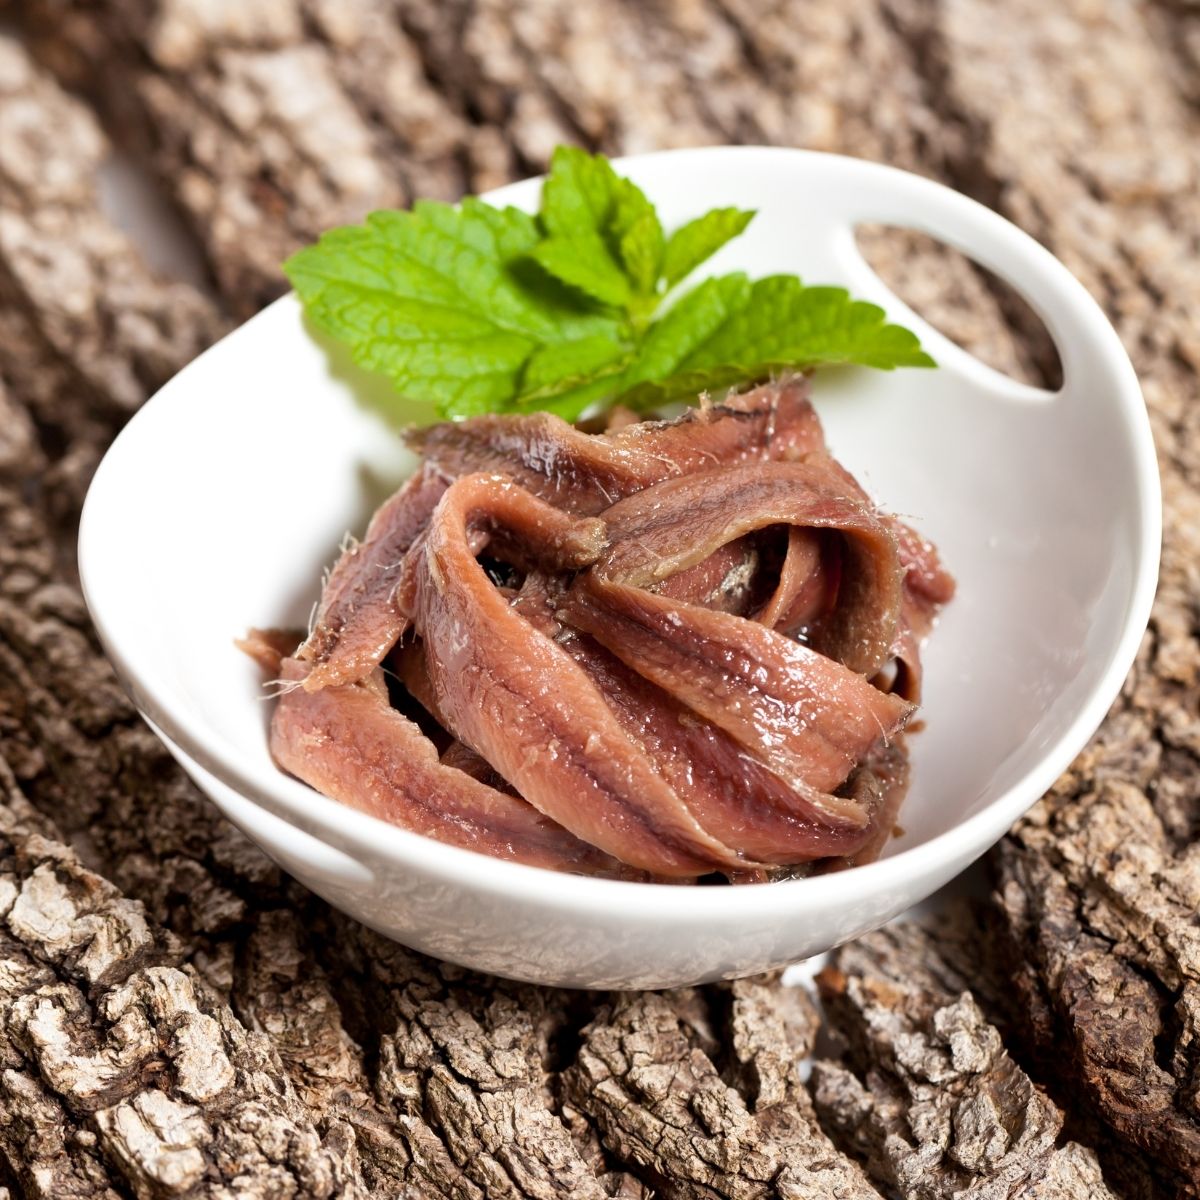 Top 5 Anchovy Substitutes